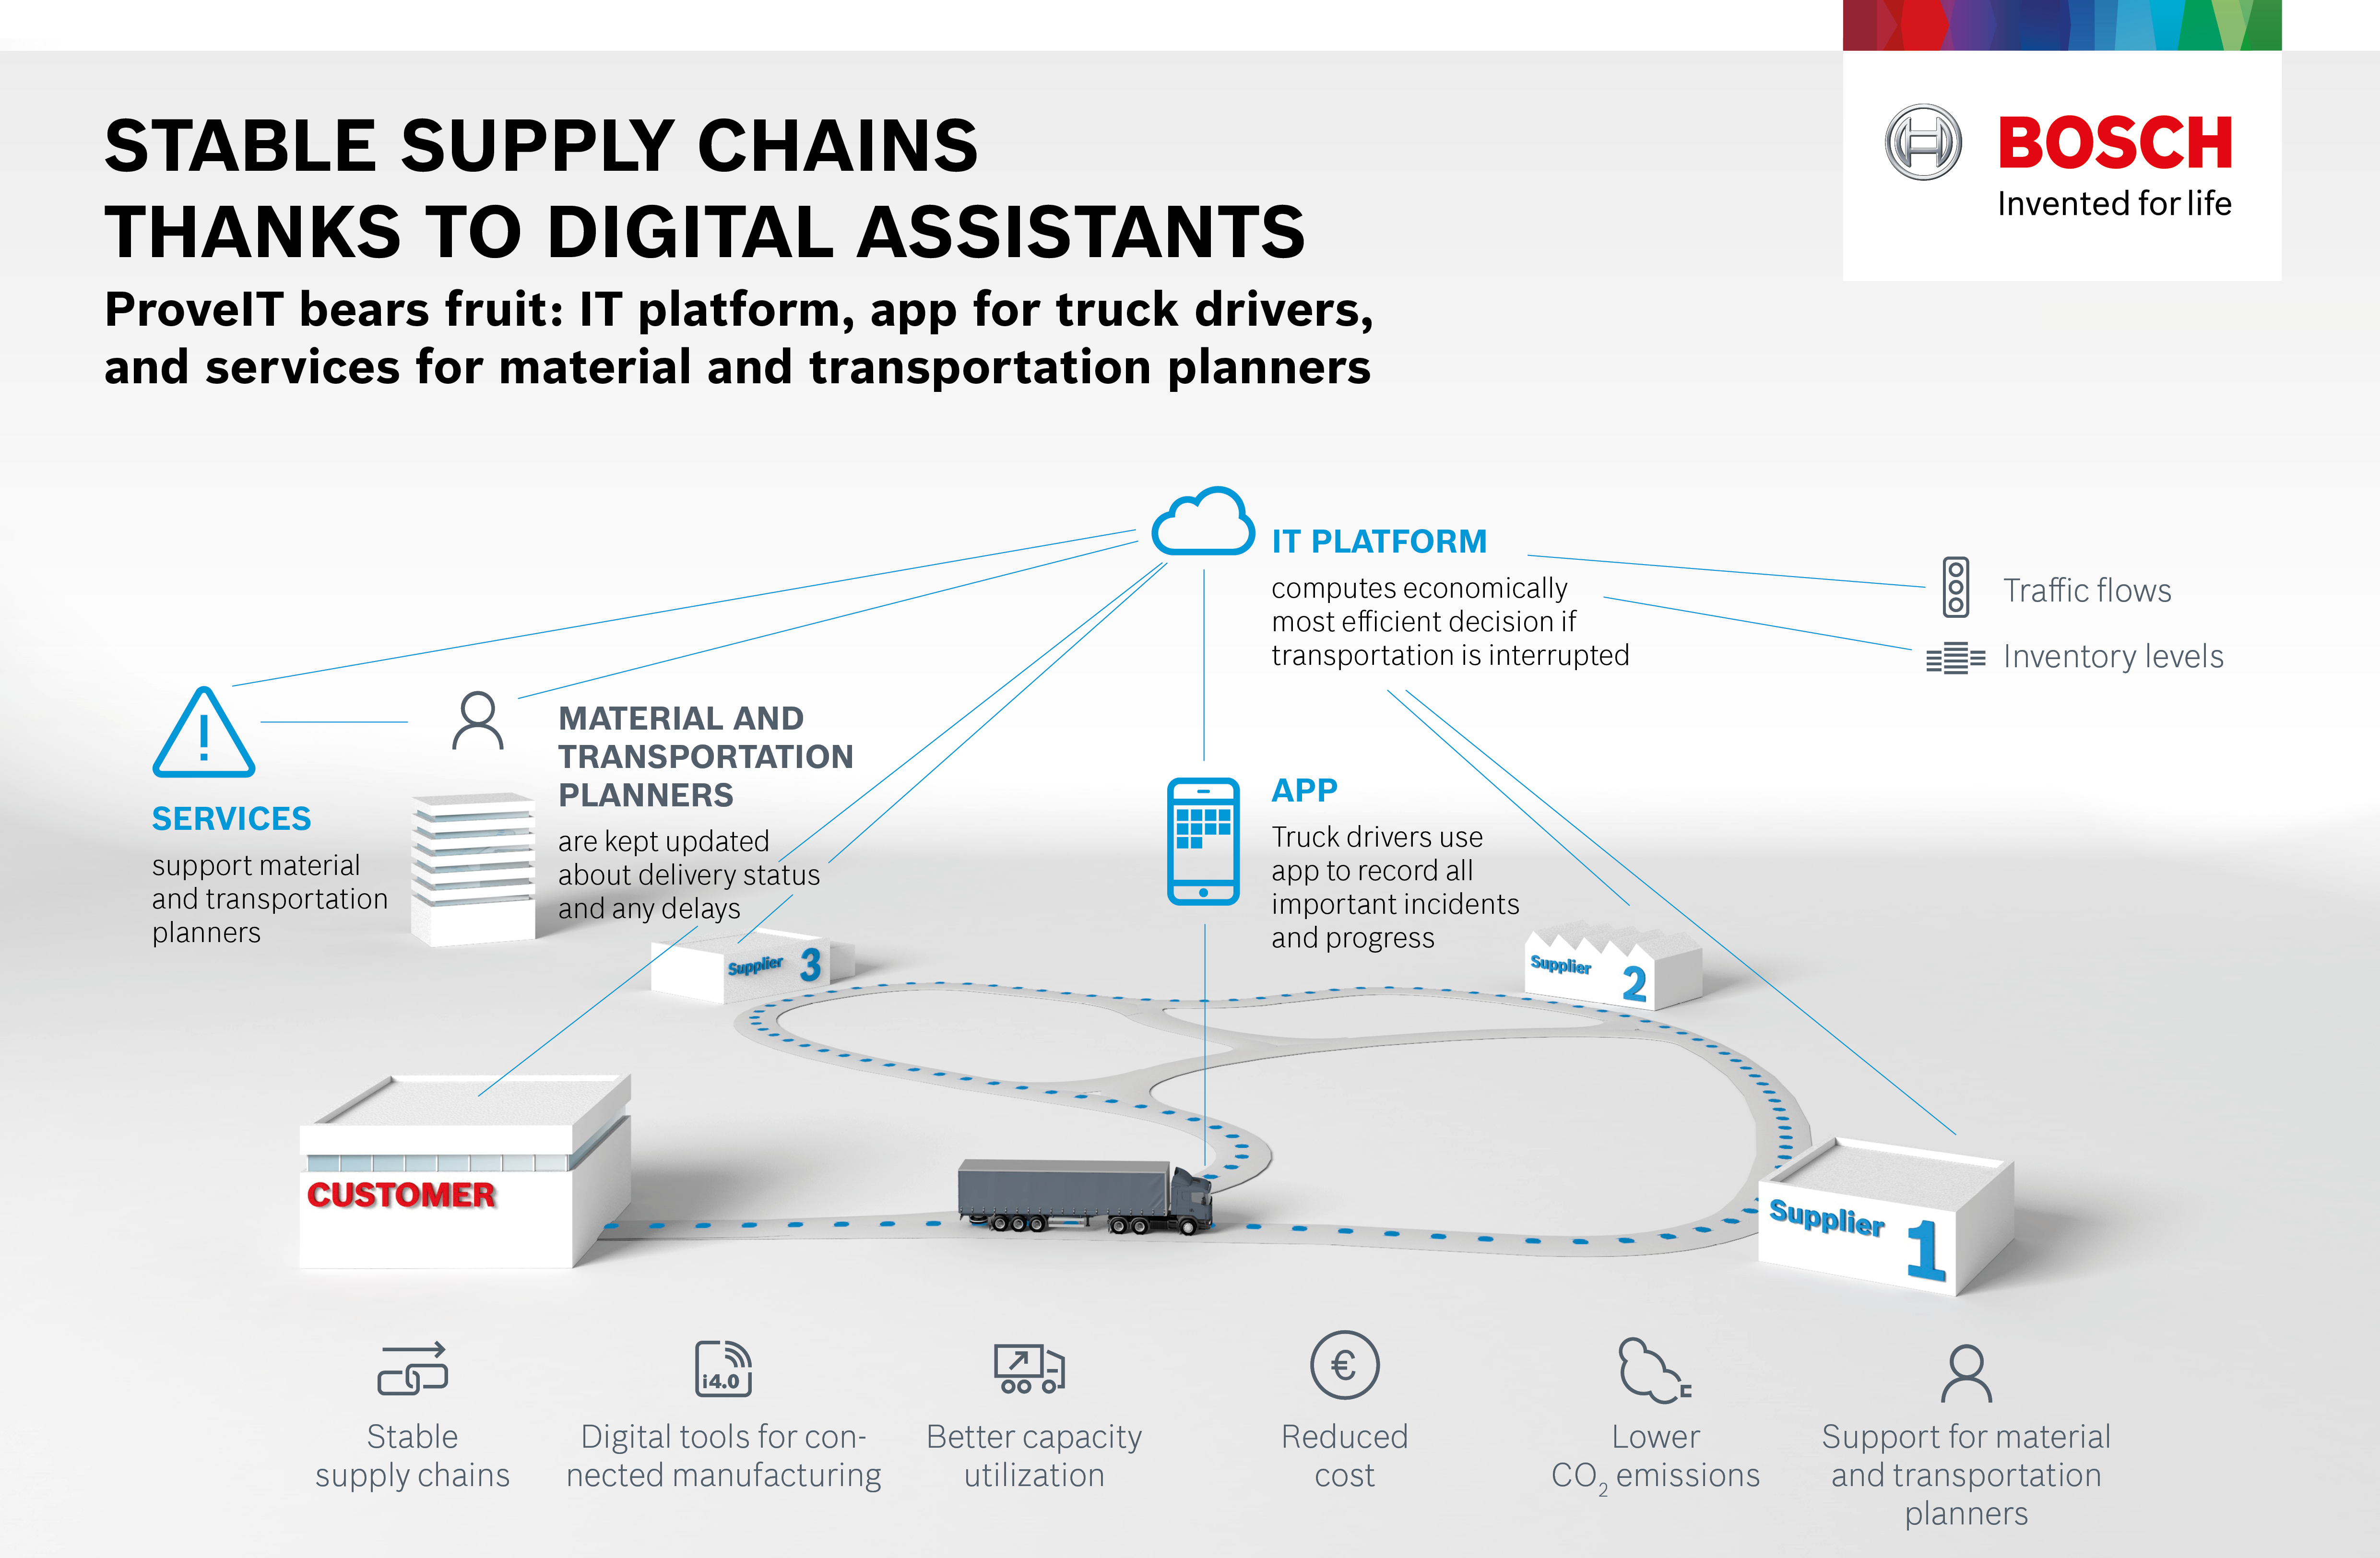 Stable supply chains thanks to digital assistants